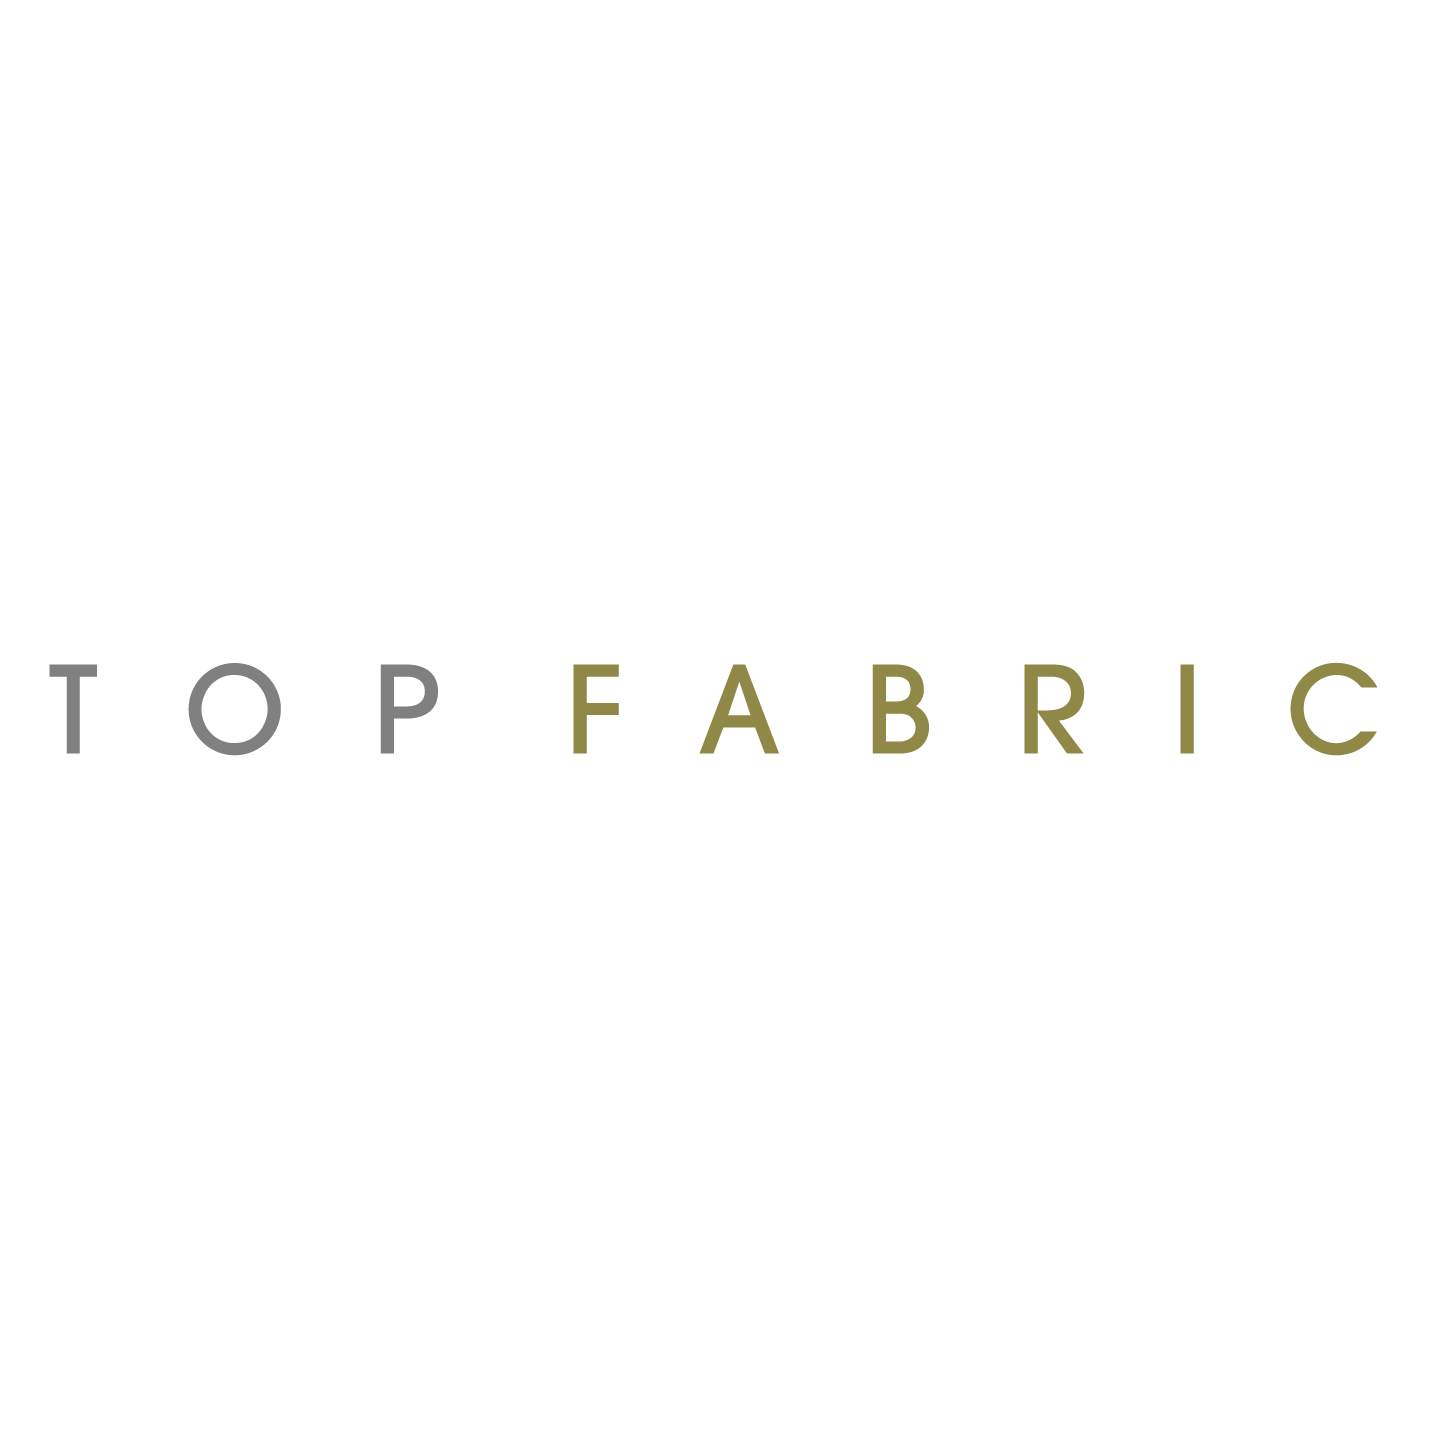 Buy fabric online PVC, coated, gold, metallic, glossy, vinyl fabric samples available